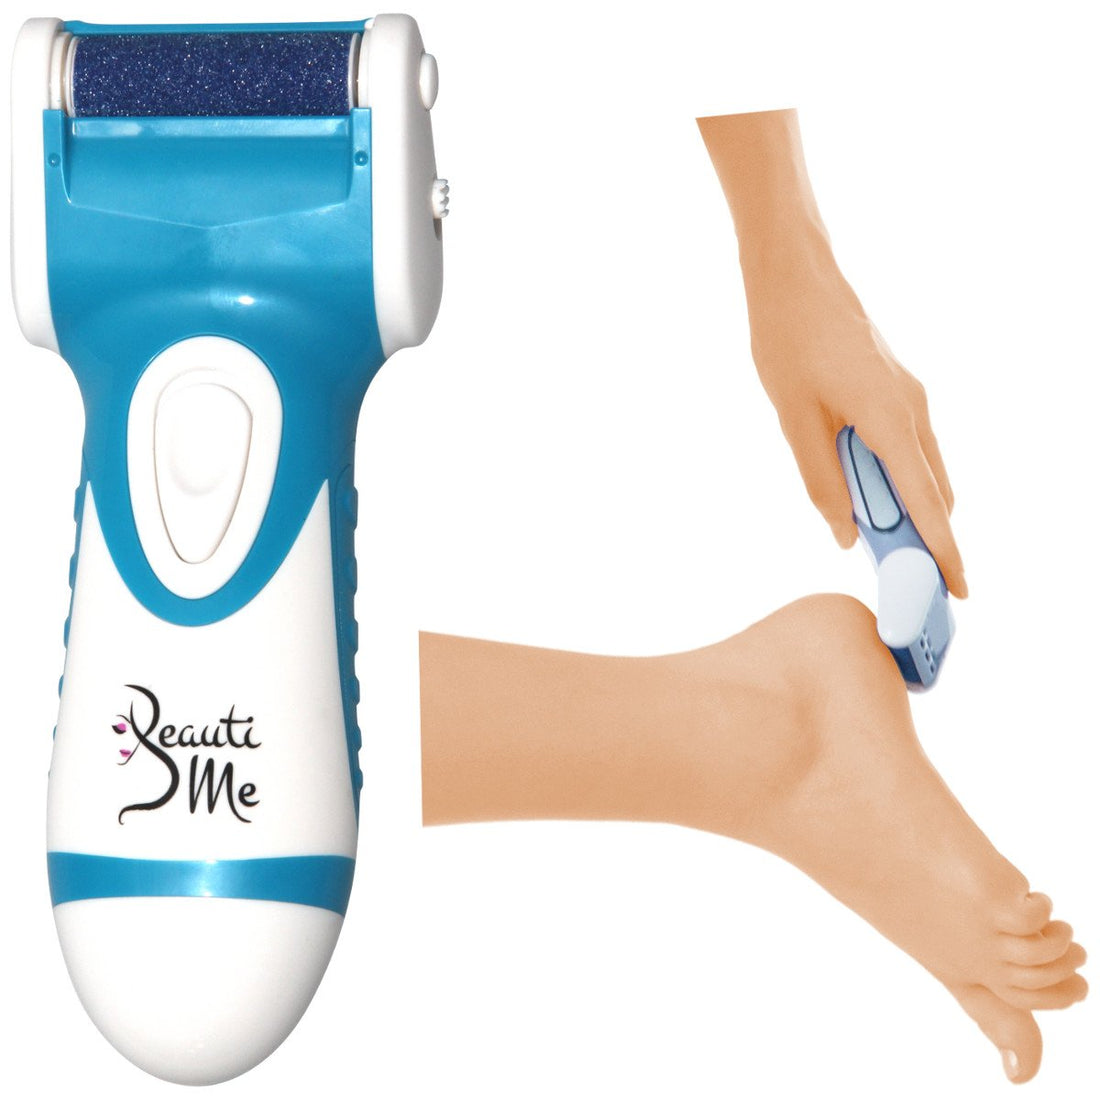 Callus Remover Professional Electronic Pedicure Foot File - Remove Hard Callused Dead and Cracked Skin (Blue)